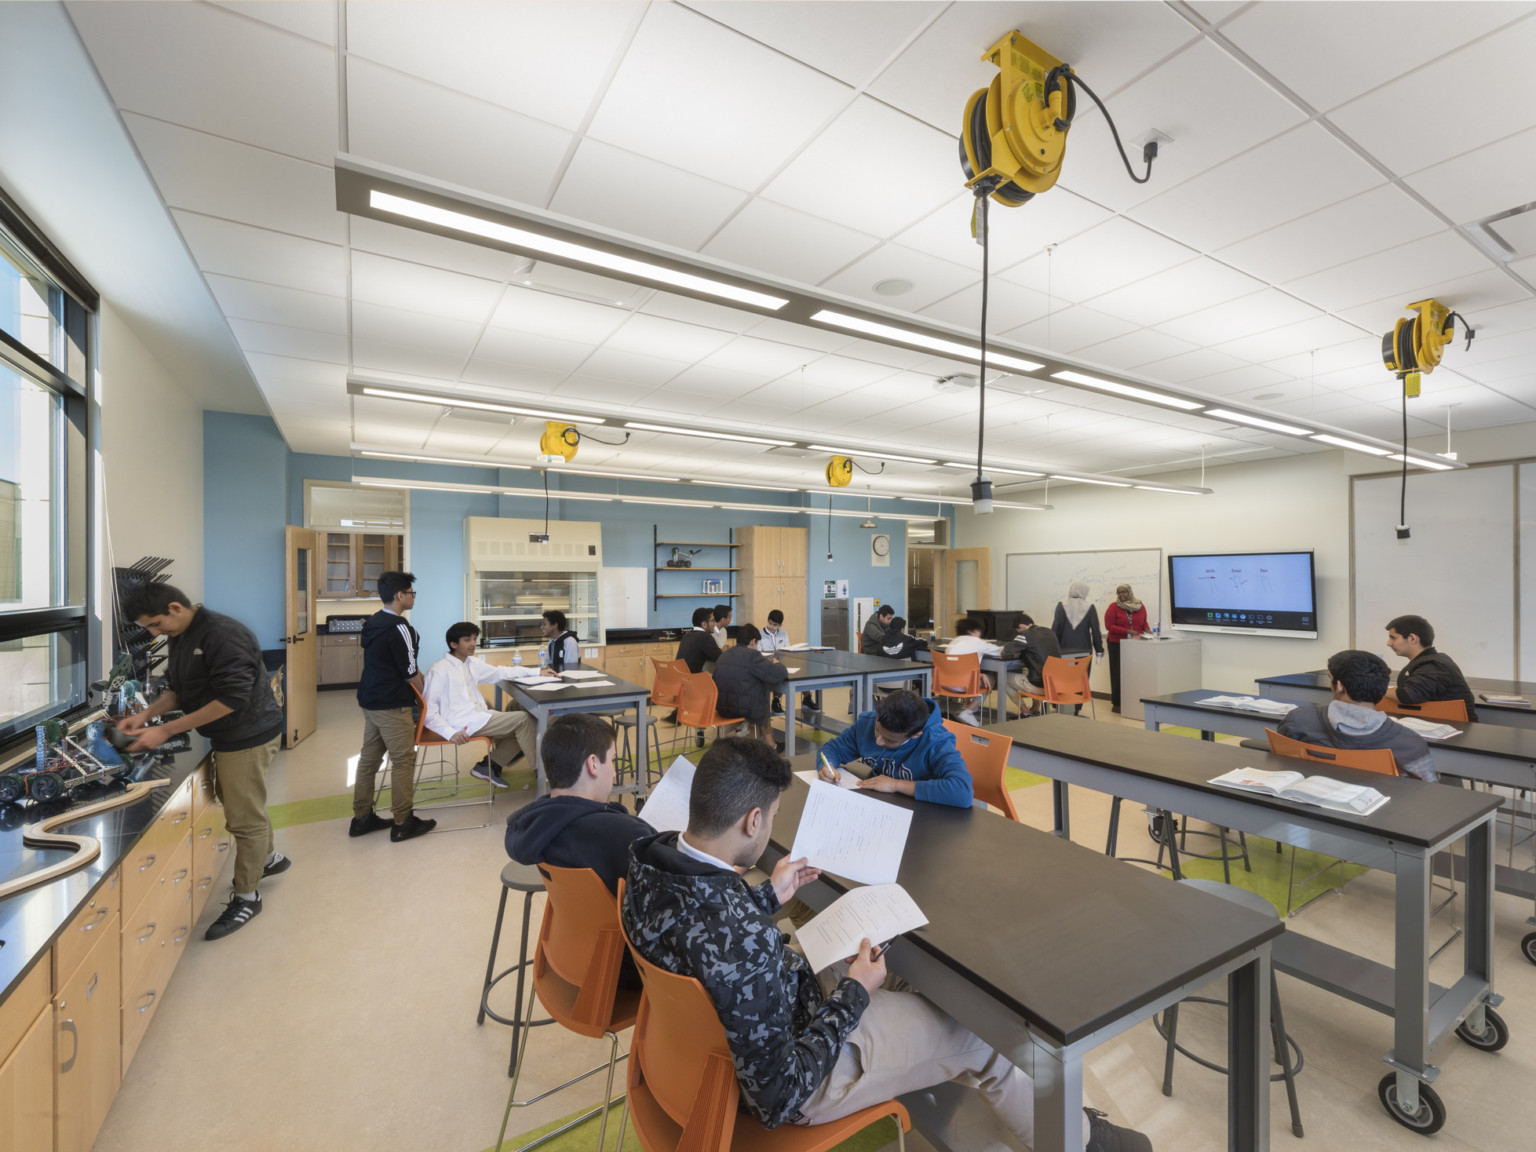 science and tech classroom with accessible power at each moveable desk, a touchscreen, and lab equipment on the far wall